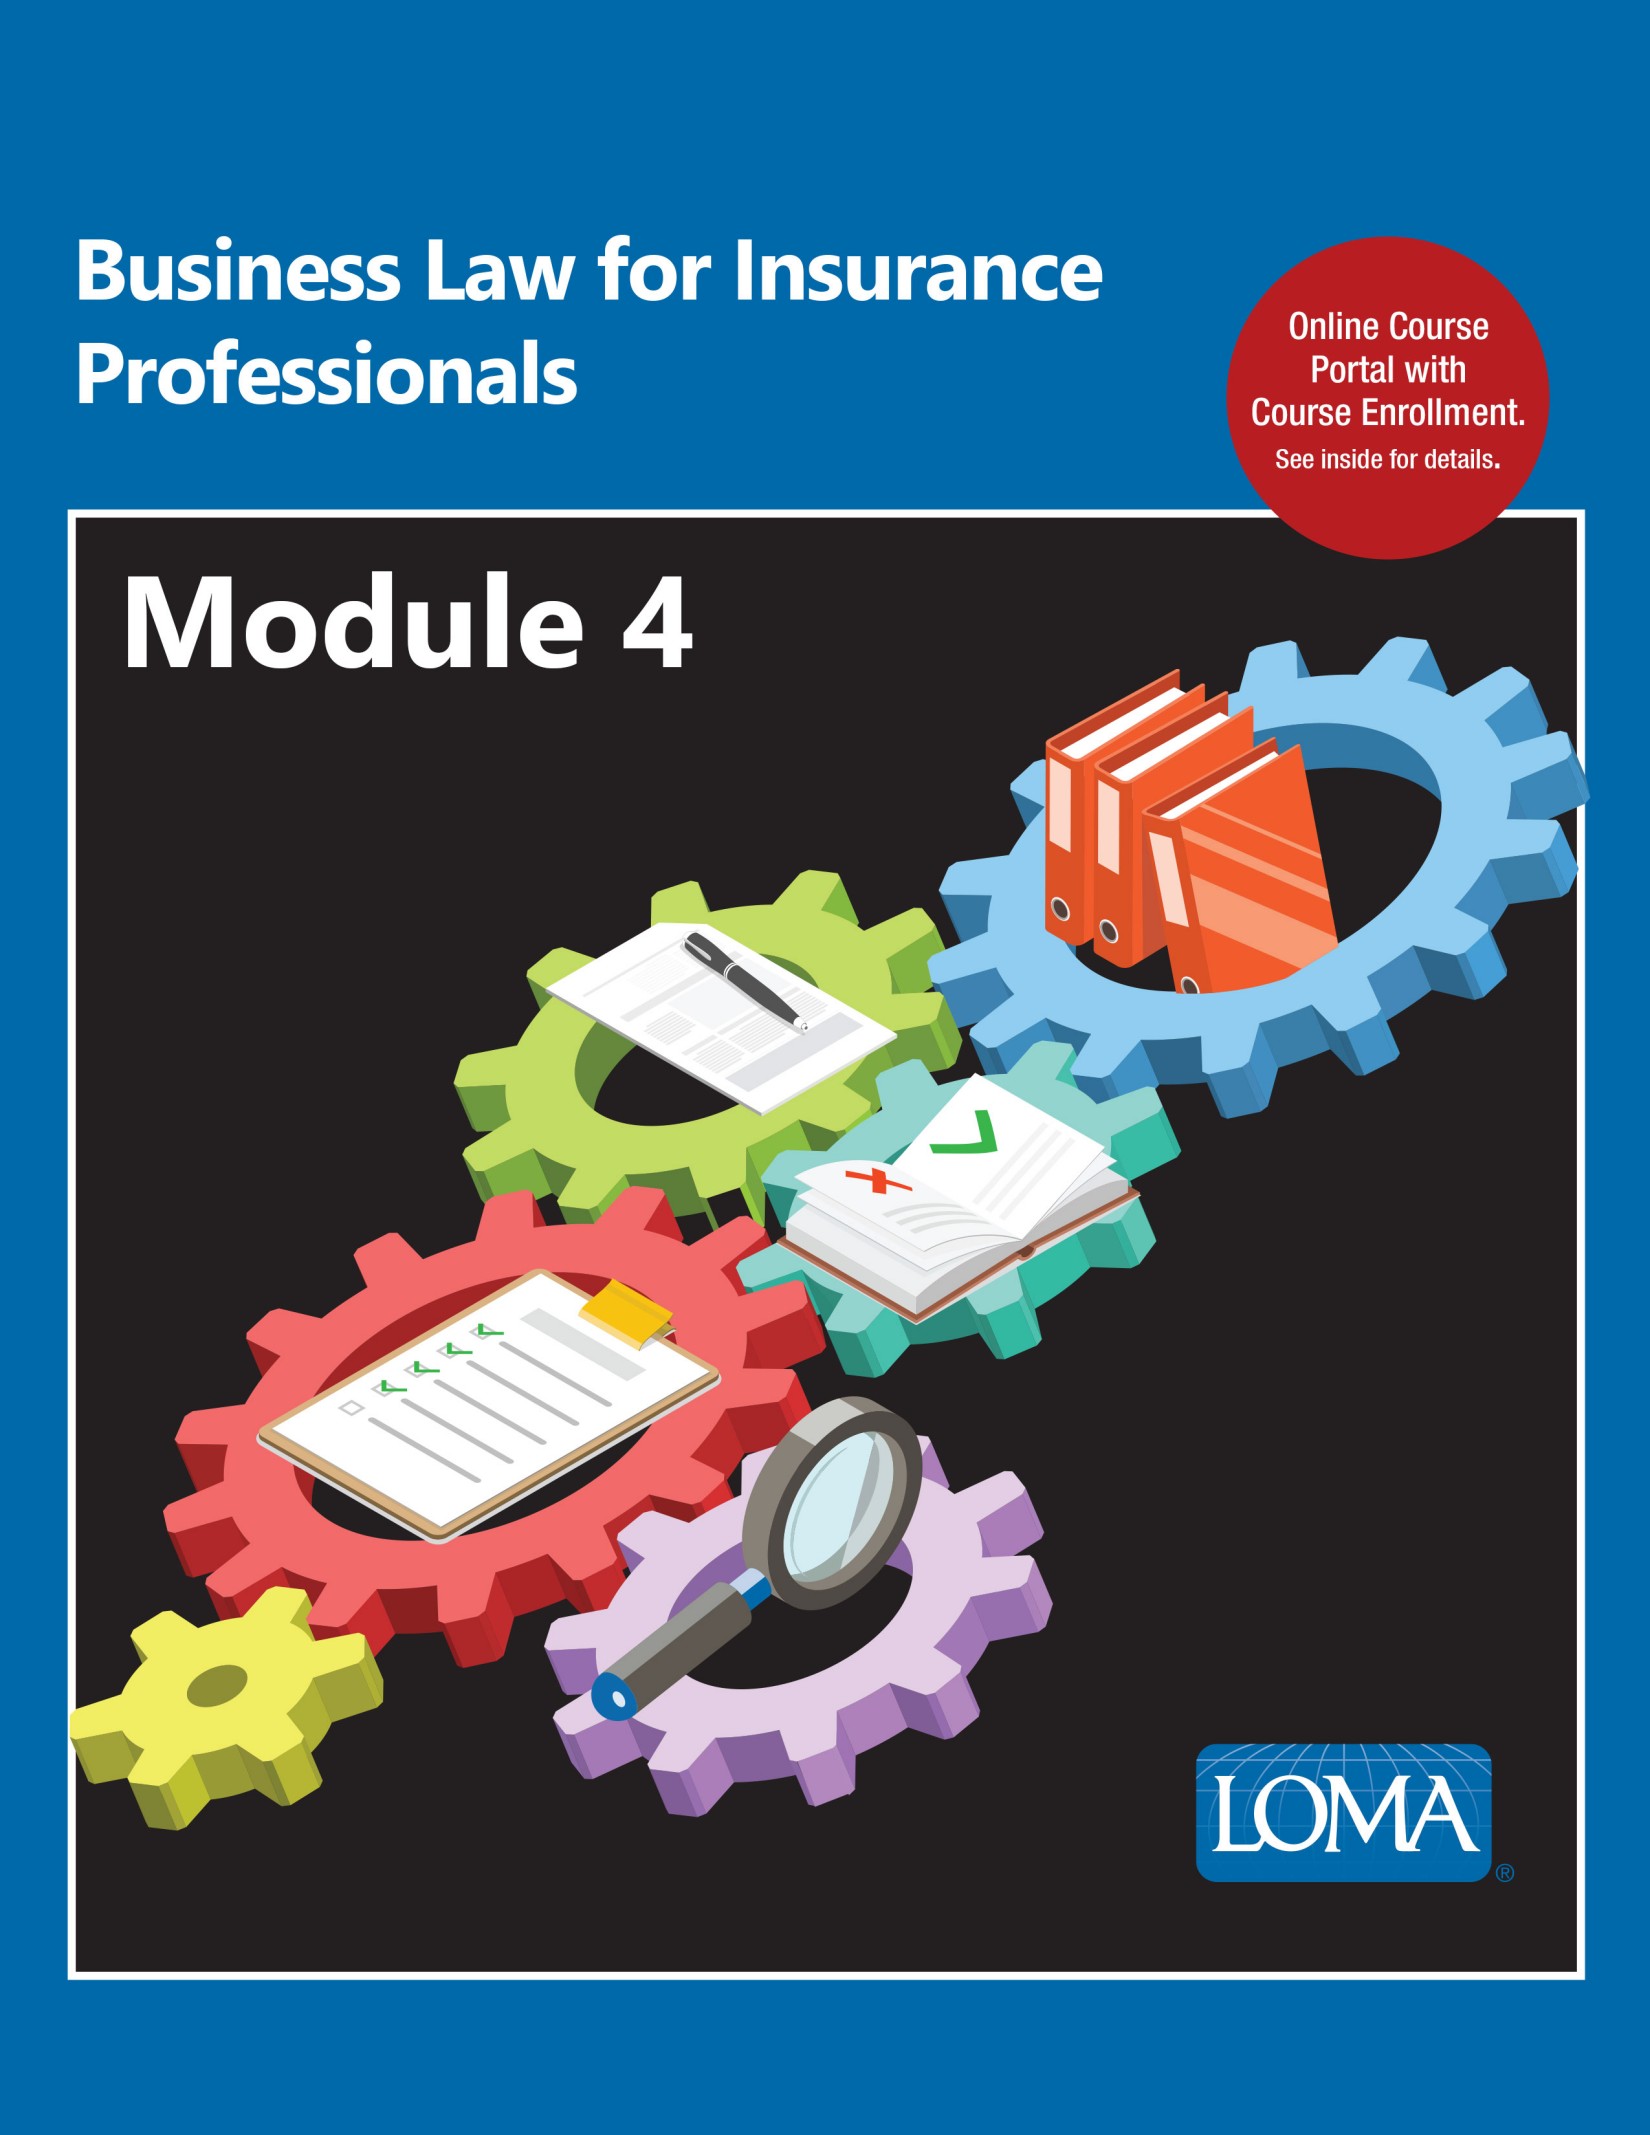 Business Law for Insurance Professionals - Module 4